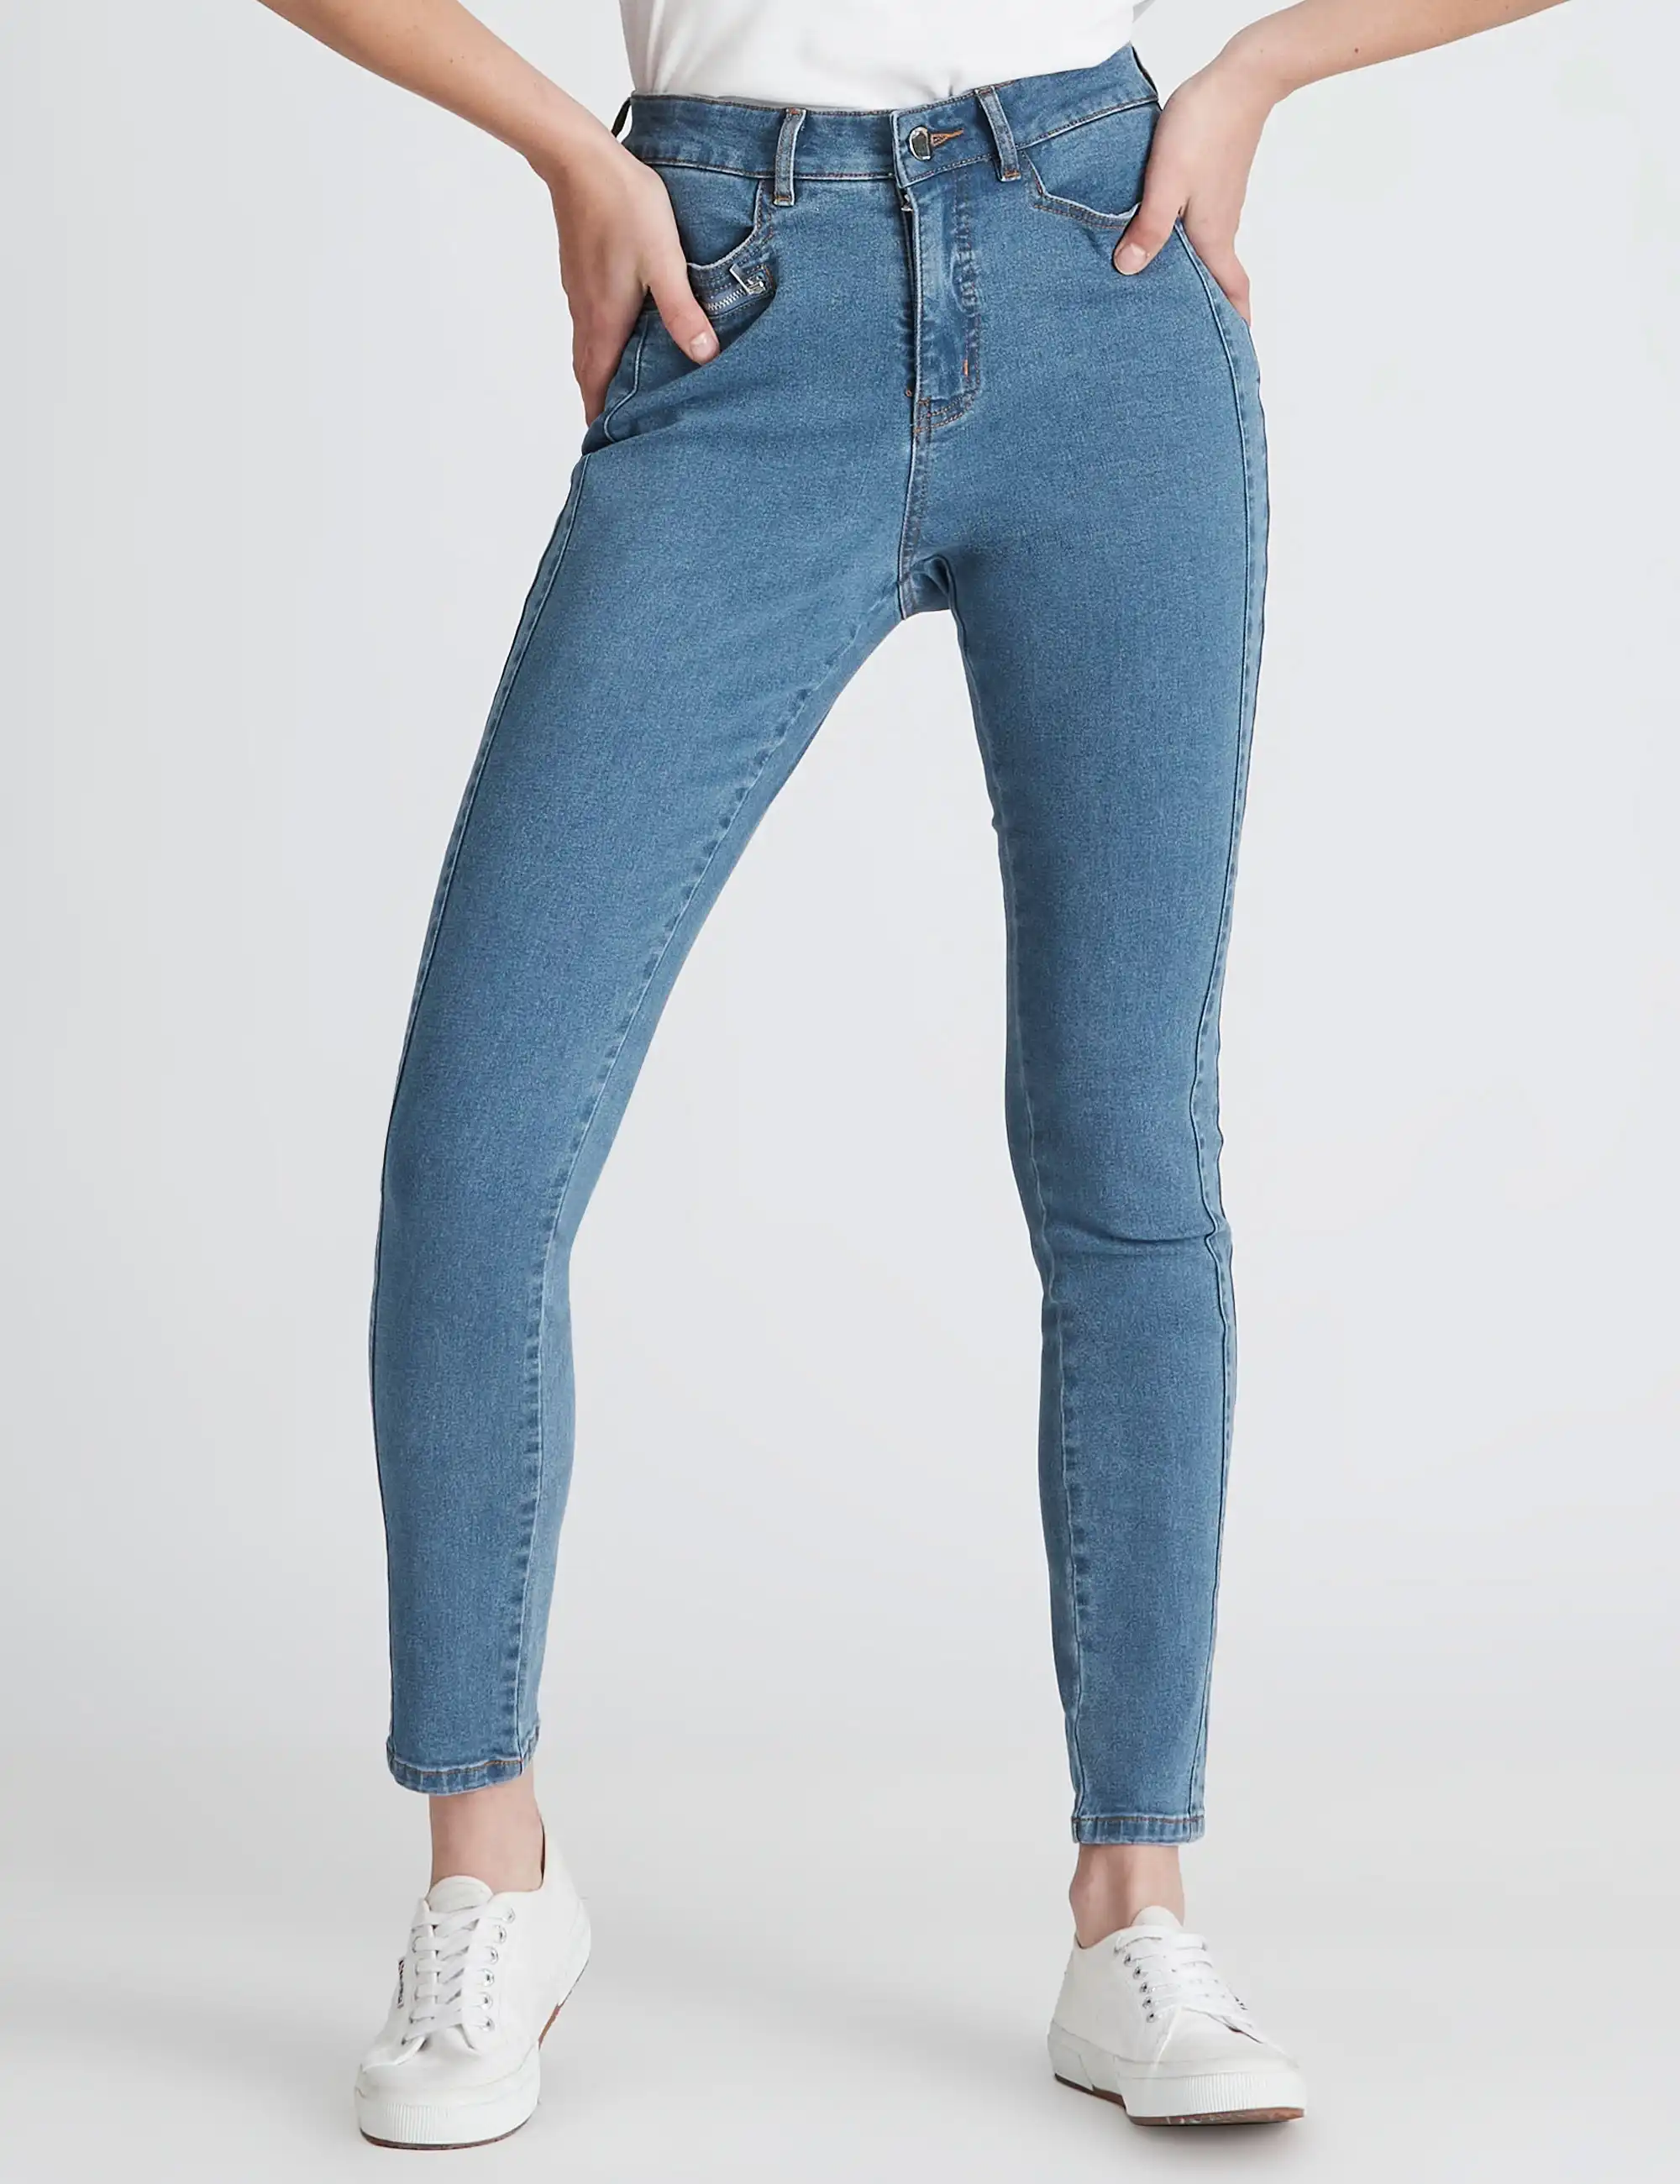 Rockmans Full Length Length Seam Front Jeans